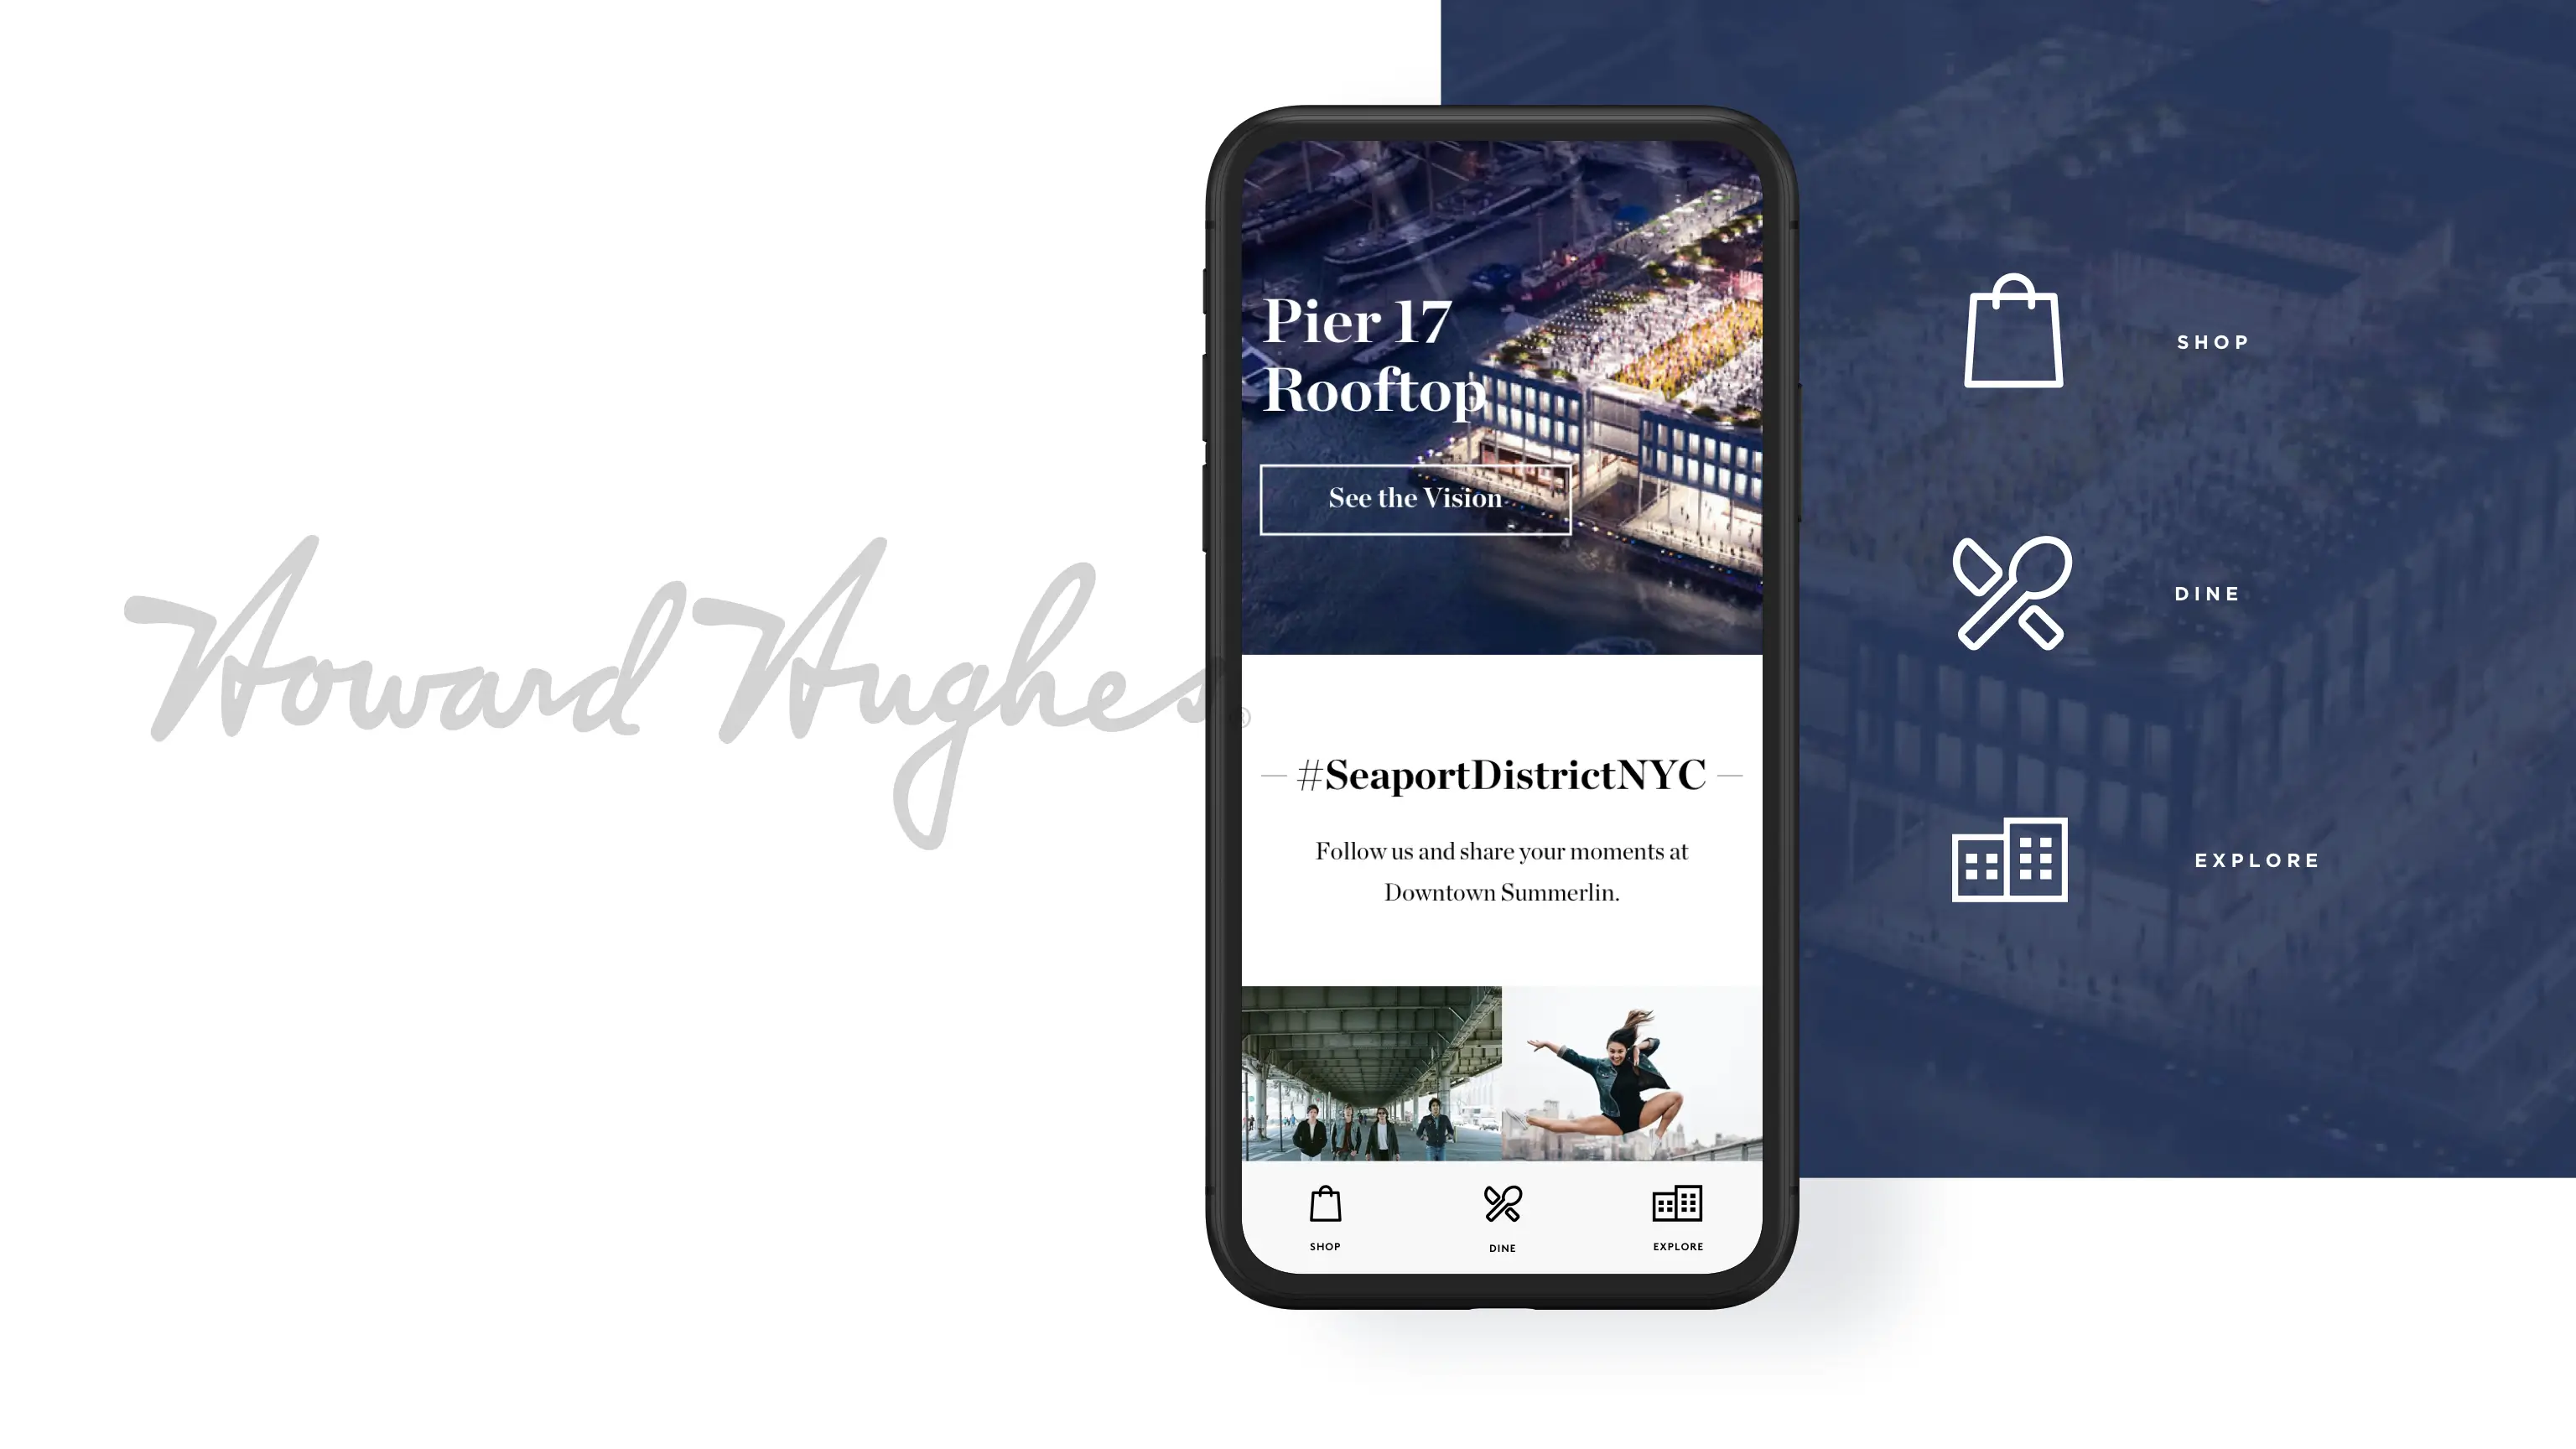 Screenshot of Howard Hughes website mobile experience to Shop, Dine and Explore.